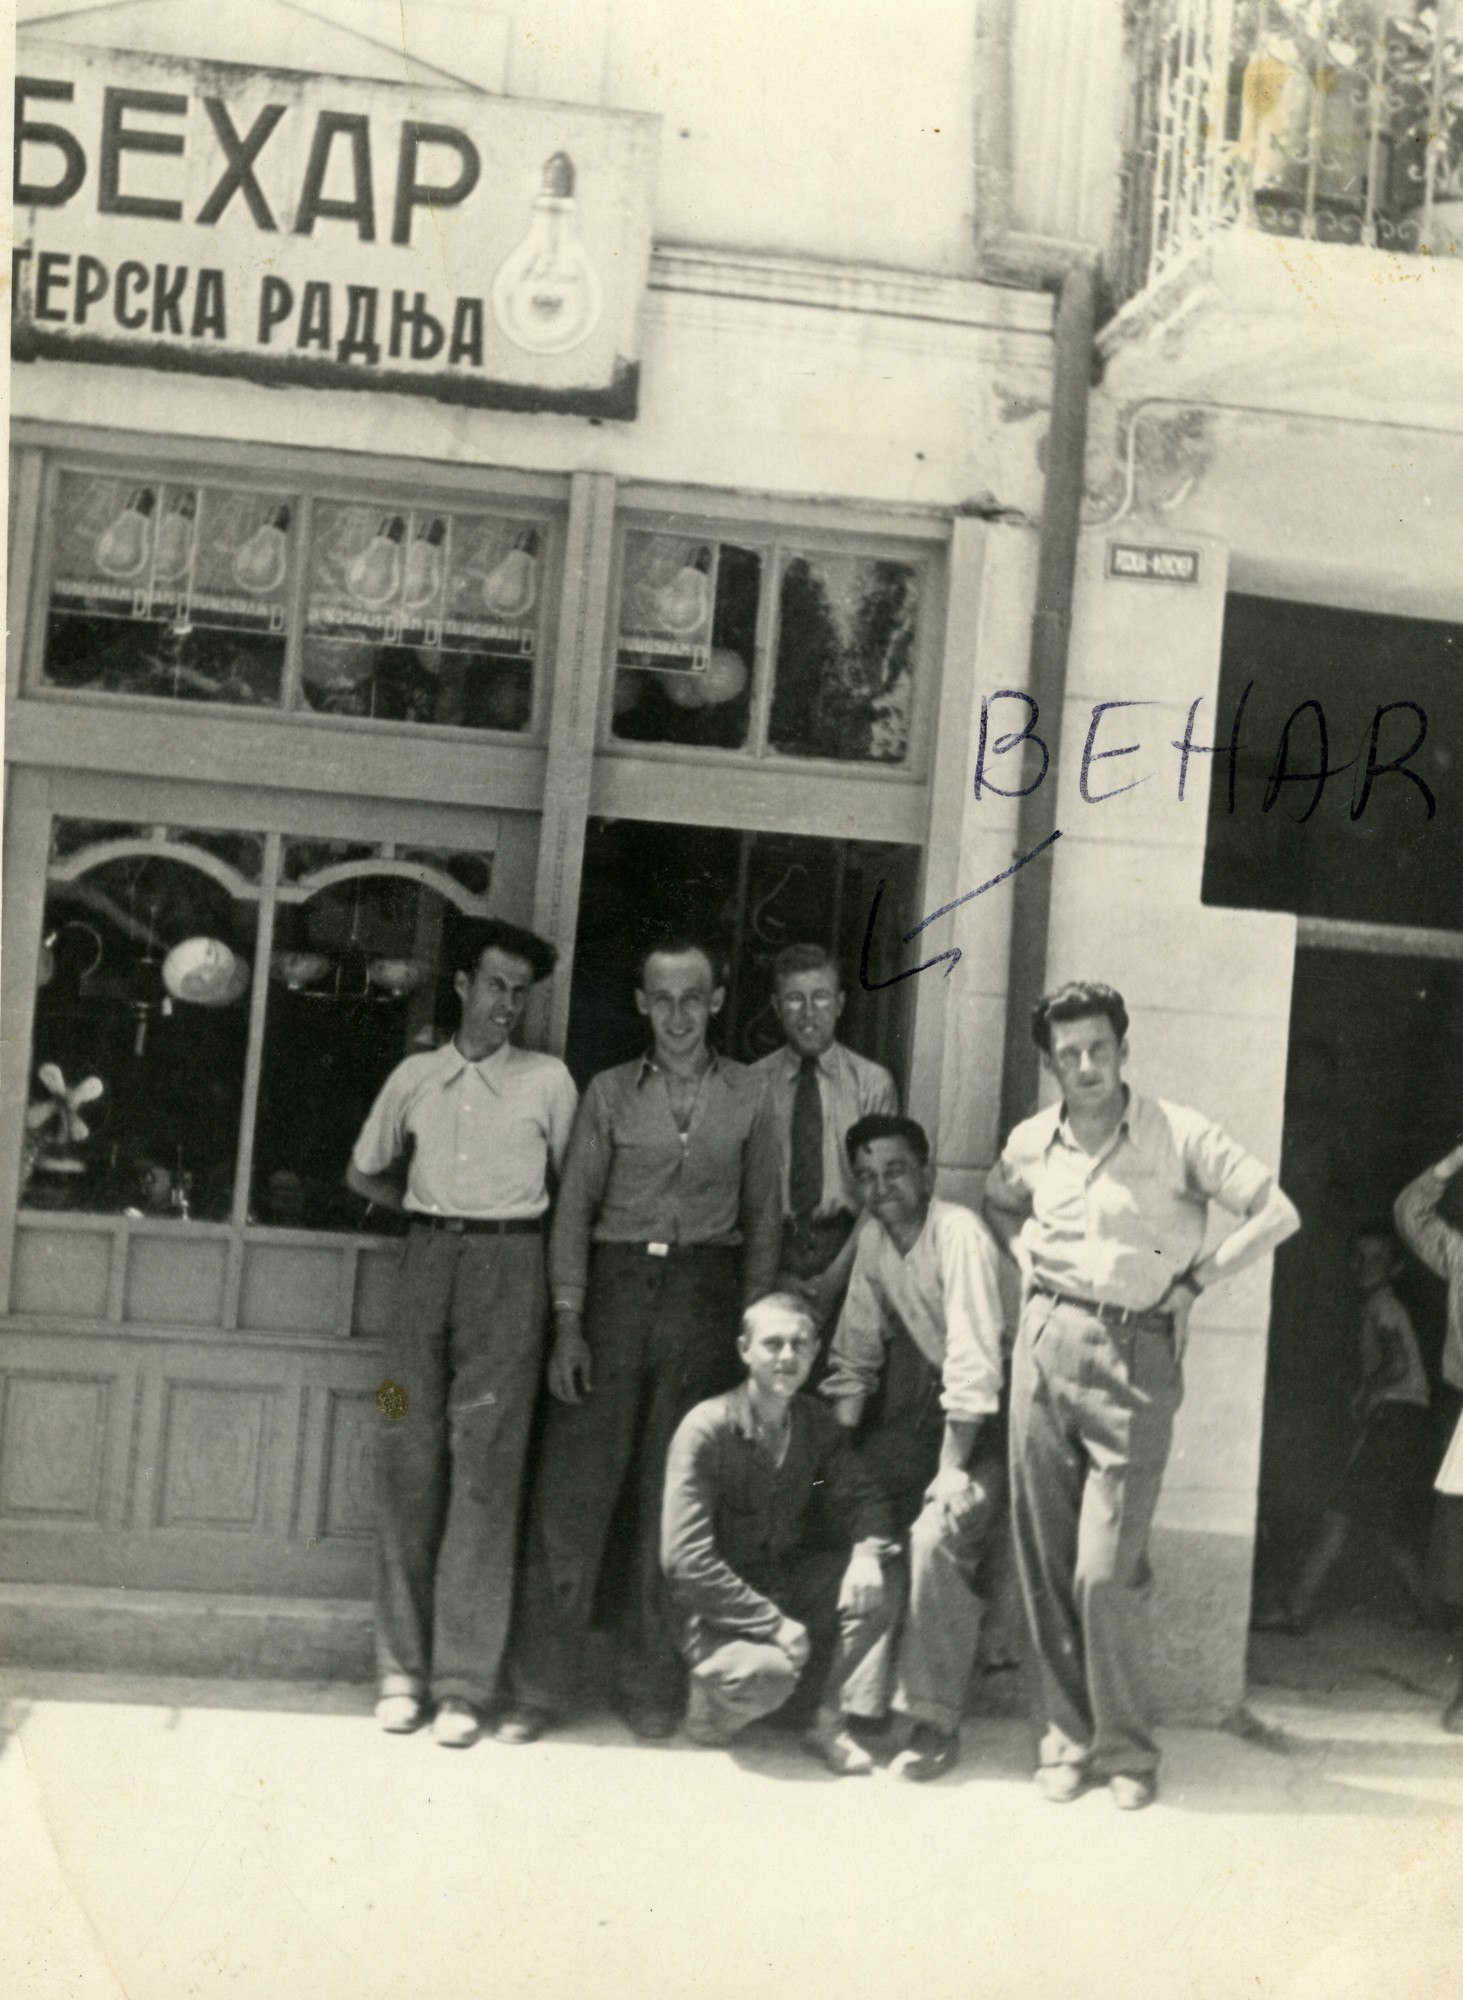 Owners of an electical store pose at its entrance, with friends.

Among those pictured is Aharon Behar (standing in back, wearing glasses) and his friend and business partner Aleksander Todorov (far right).